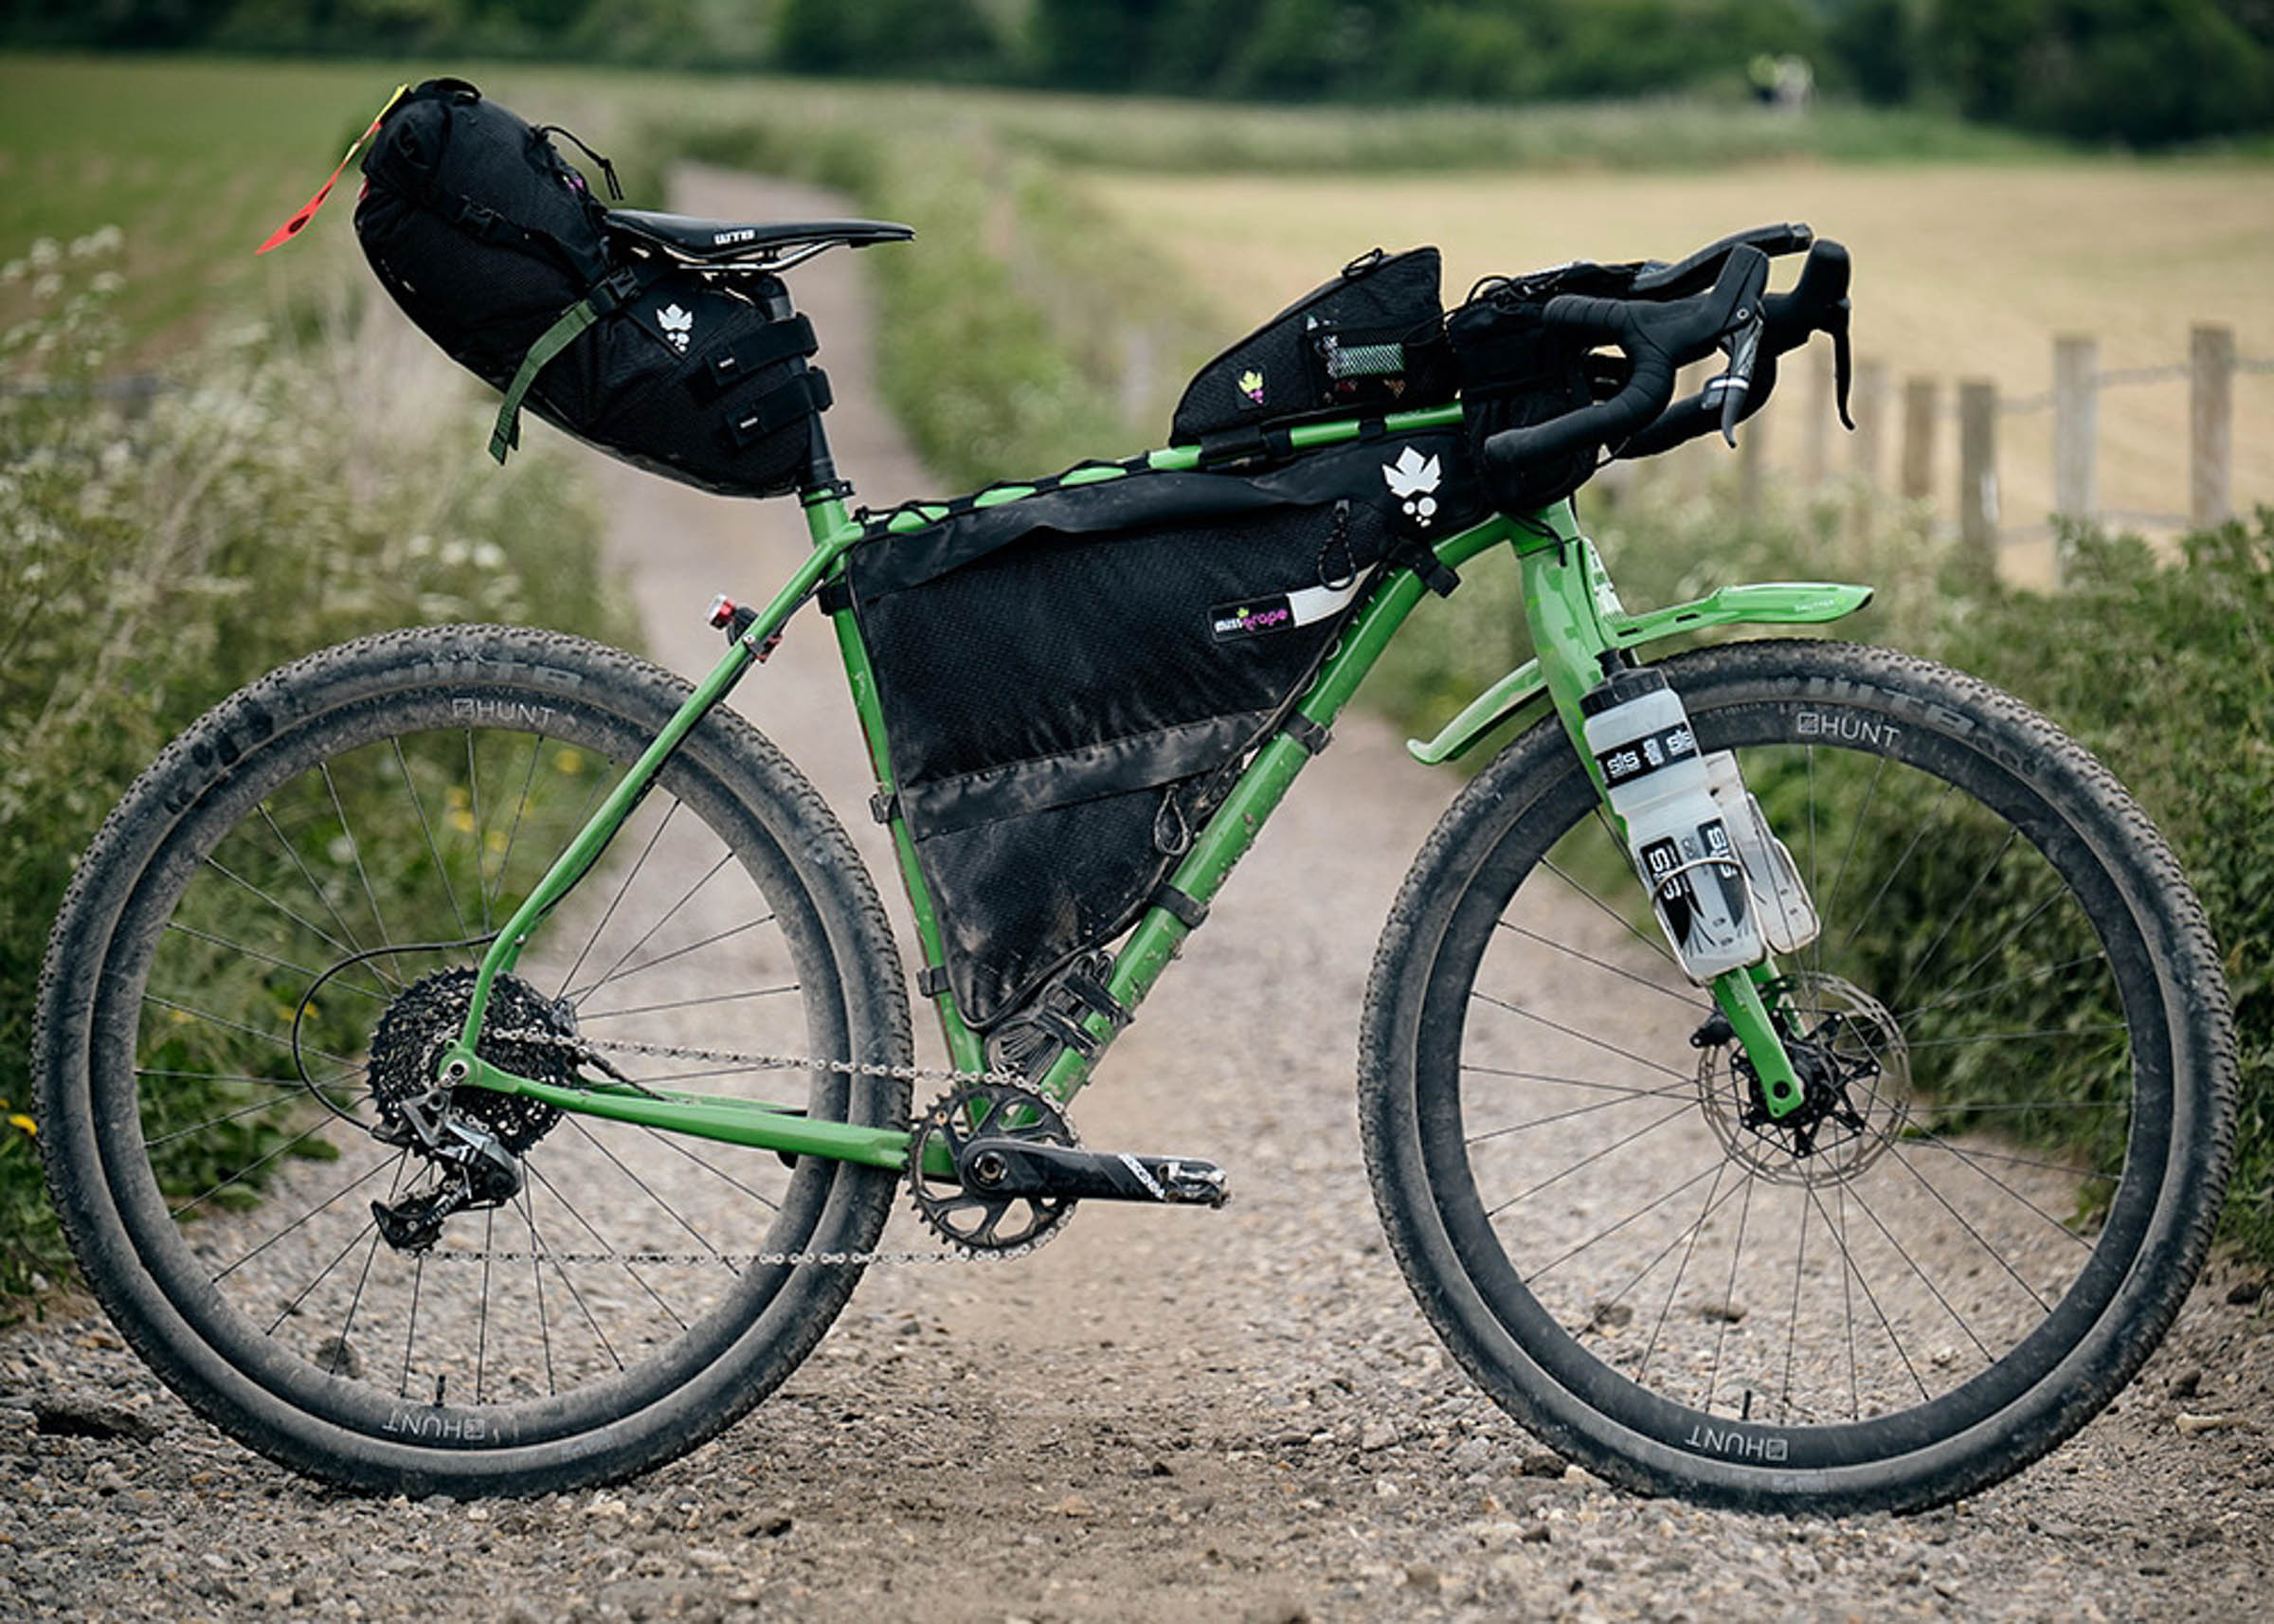 Rigs of The 2019 Tour Divide